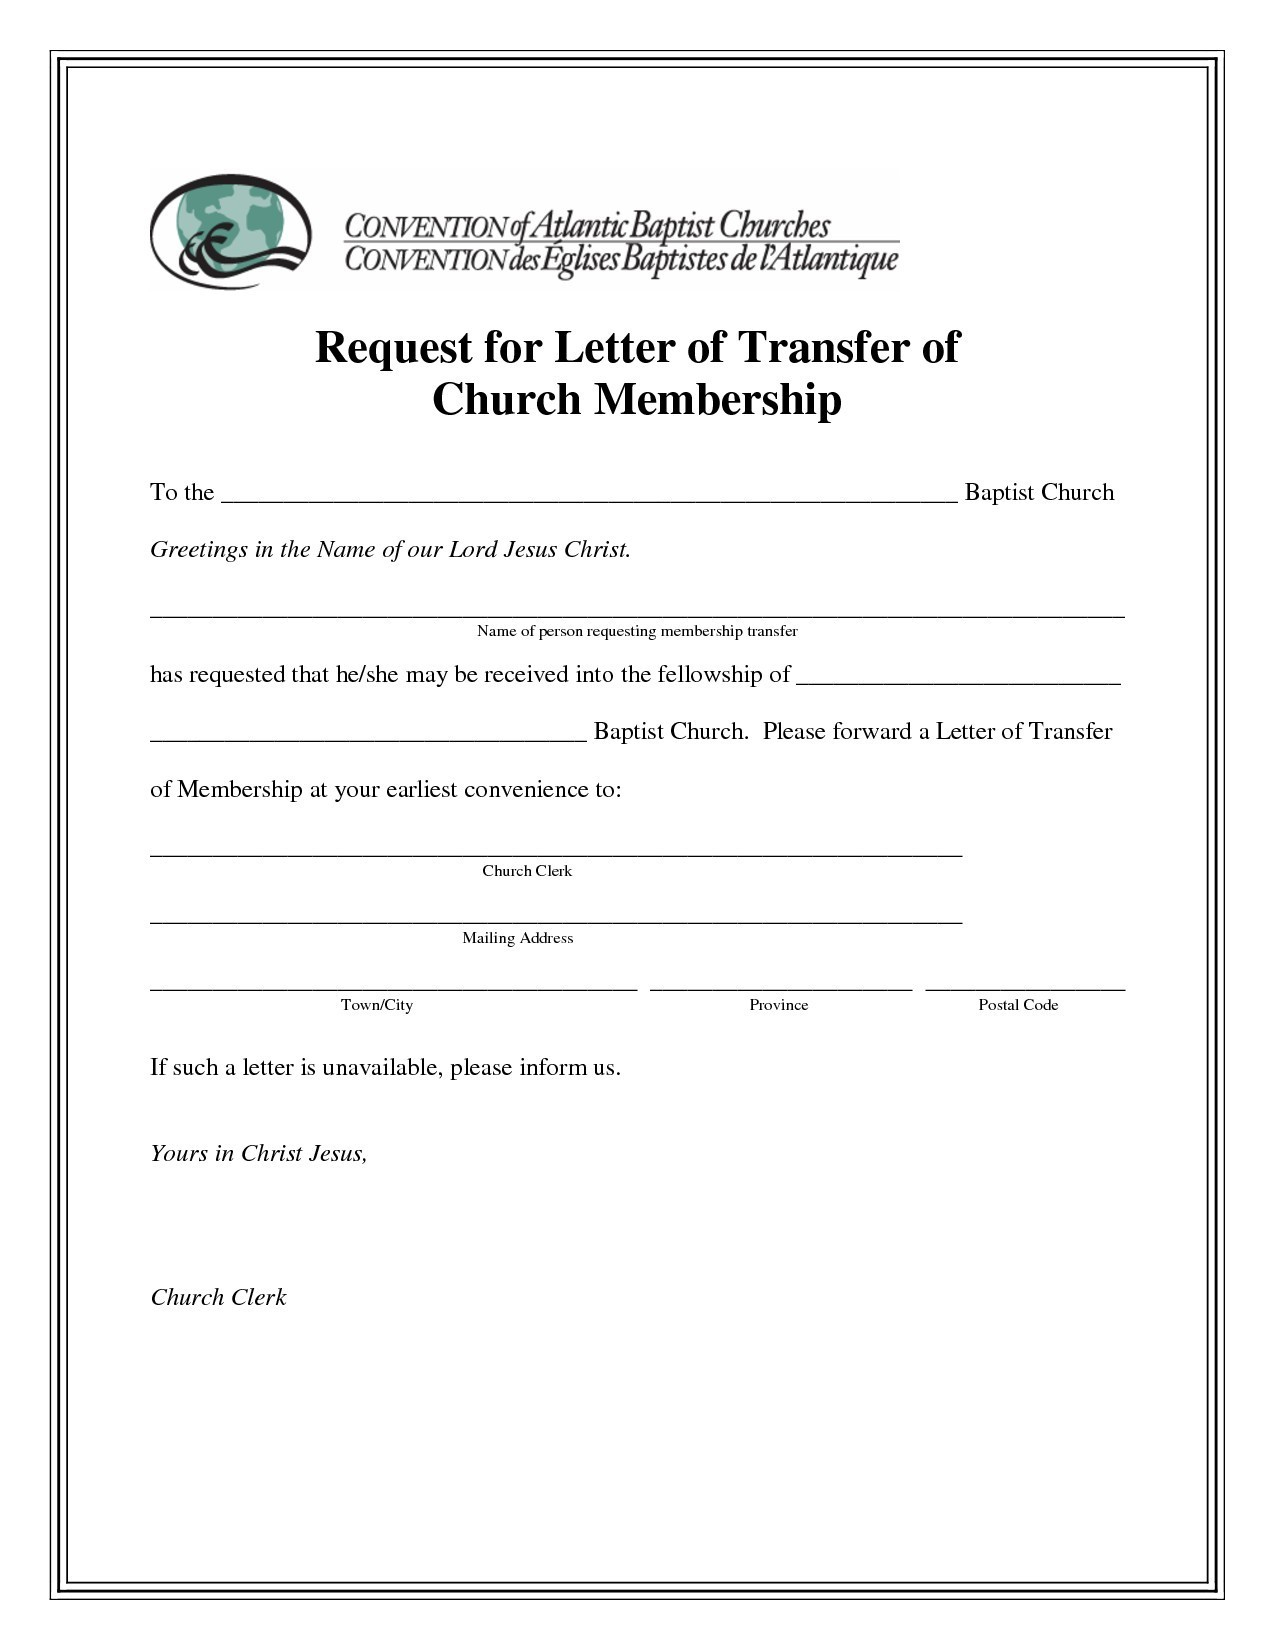 Church Membership Form Template from simpleartifact.com